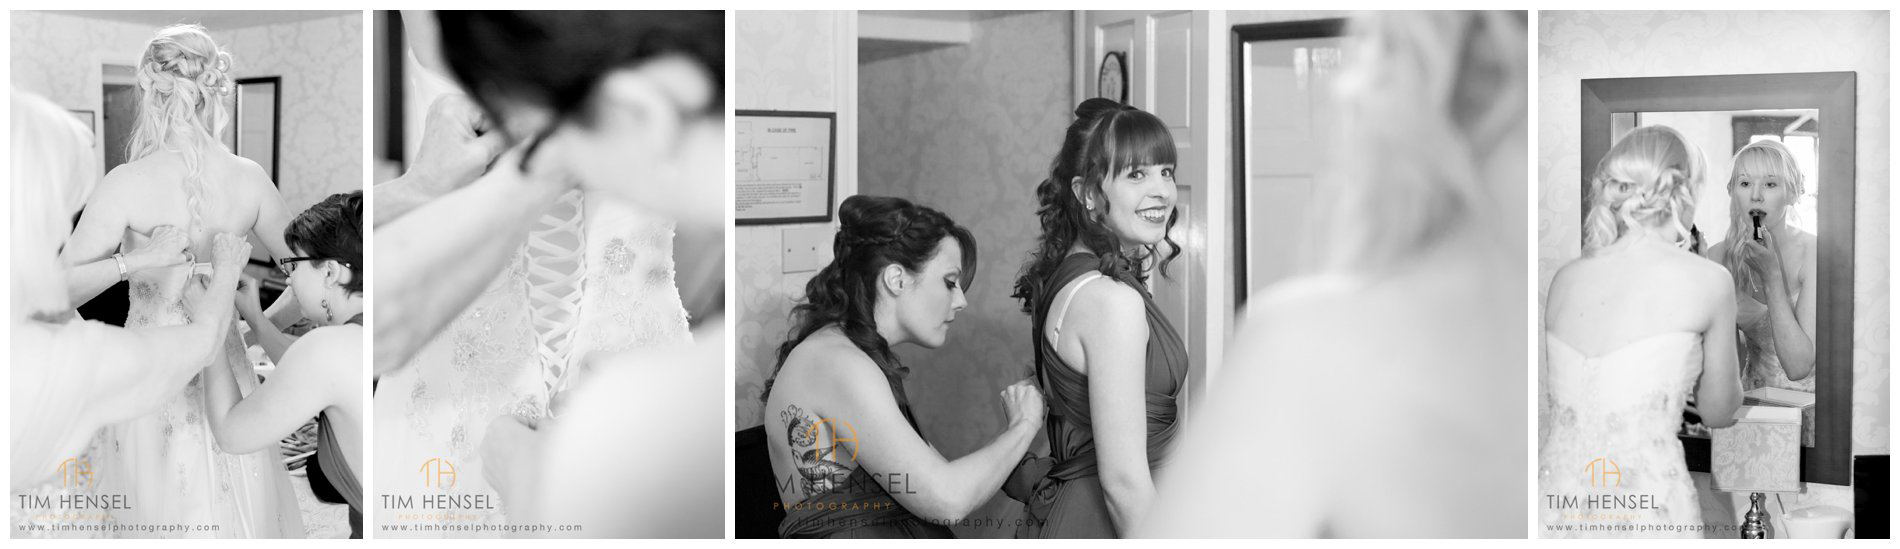 Bridal preparation photos at Underleigh House in the Peak District